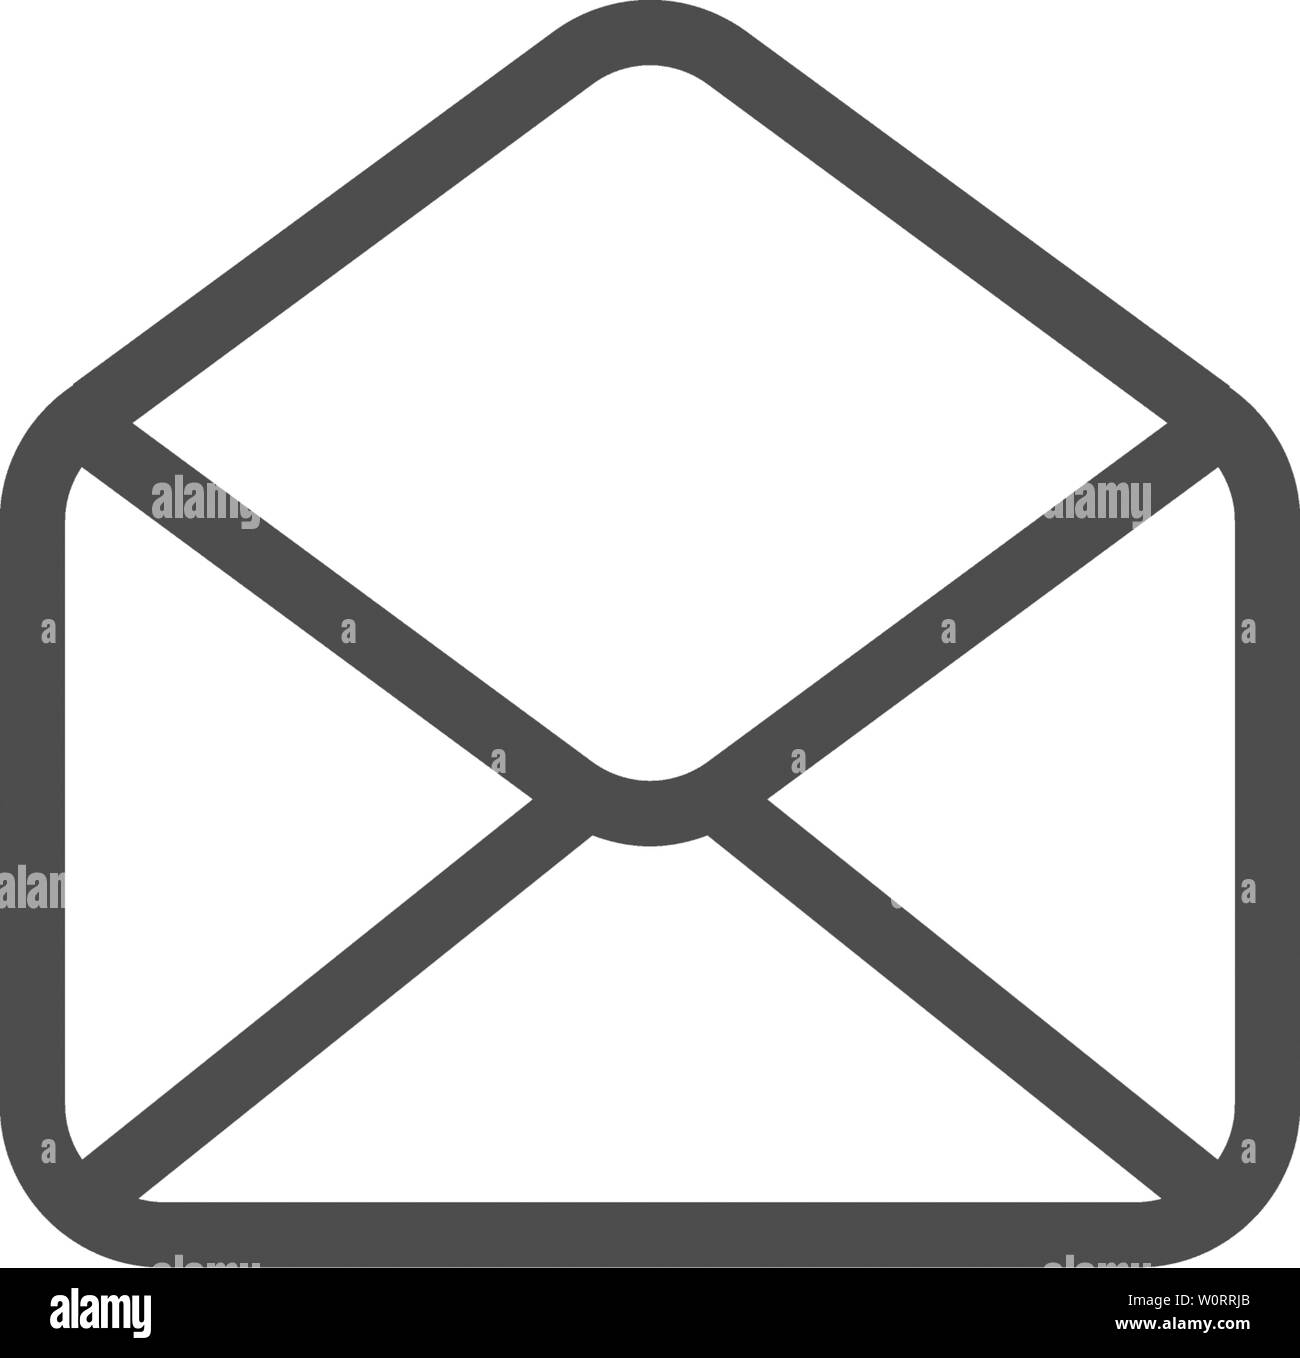 Mail and e-mail icon isolated. Envelope symbol e-mail. Email message sign. Flat design. Vector Illustration, eps 10 Stock Vector